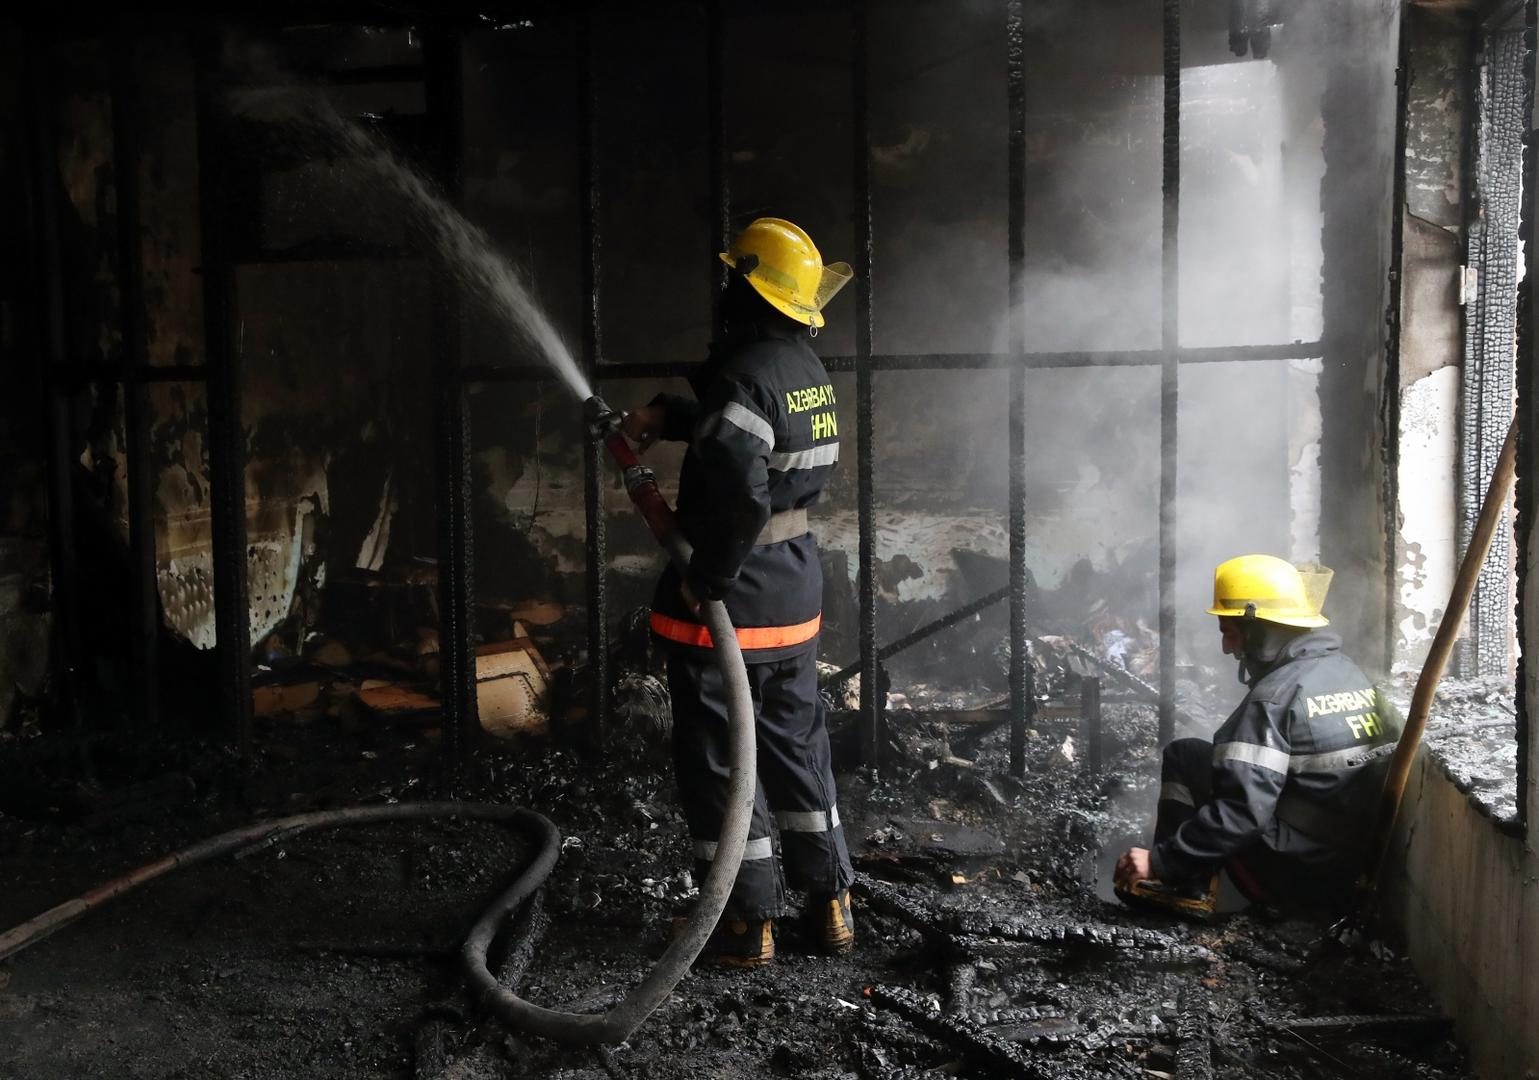 BARDA, AZERBAIJAN - OCTOBER 5, 2020: Firefighters battle a fire at a residential building damaged in a shelling attack. The situation in Nagorno-Karabakh escalated on September 27, 2020, with reports from Yerevan on the Azerbaijani troops advancing in the direction of Nagorno-Karabakh and shelling its settlements, including the capital city of Stepanakert. Both Azerbaijan and Armenia have declared martial law and military mobilization, reporting on casualties and injuries among civilians as well. Valery Sharifulin/TASS Photo via Newscom Newscom/PIXSELL